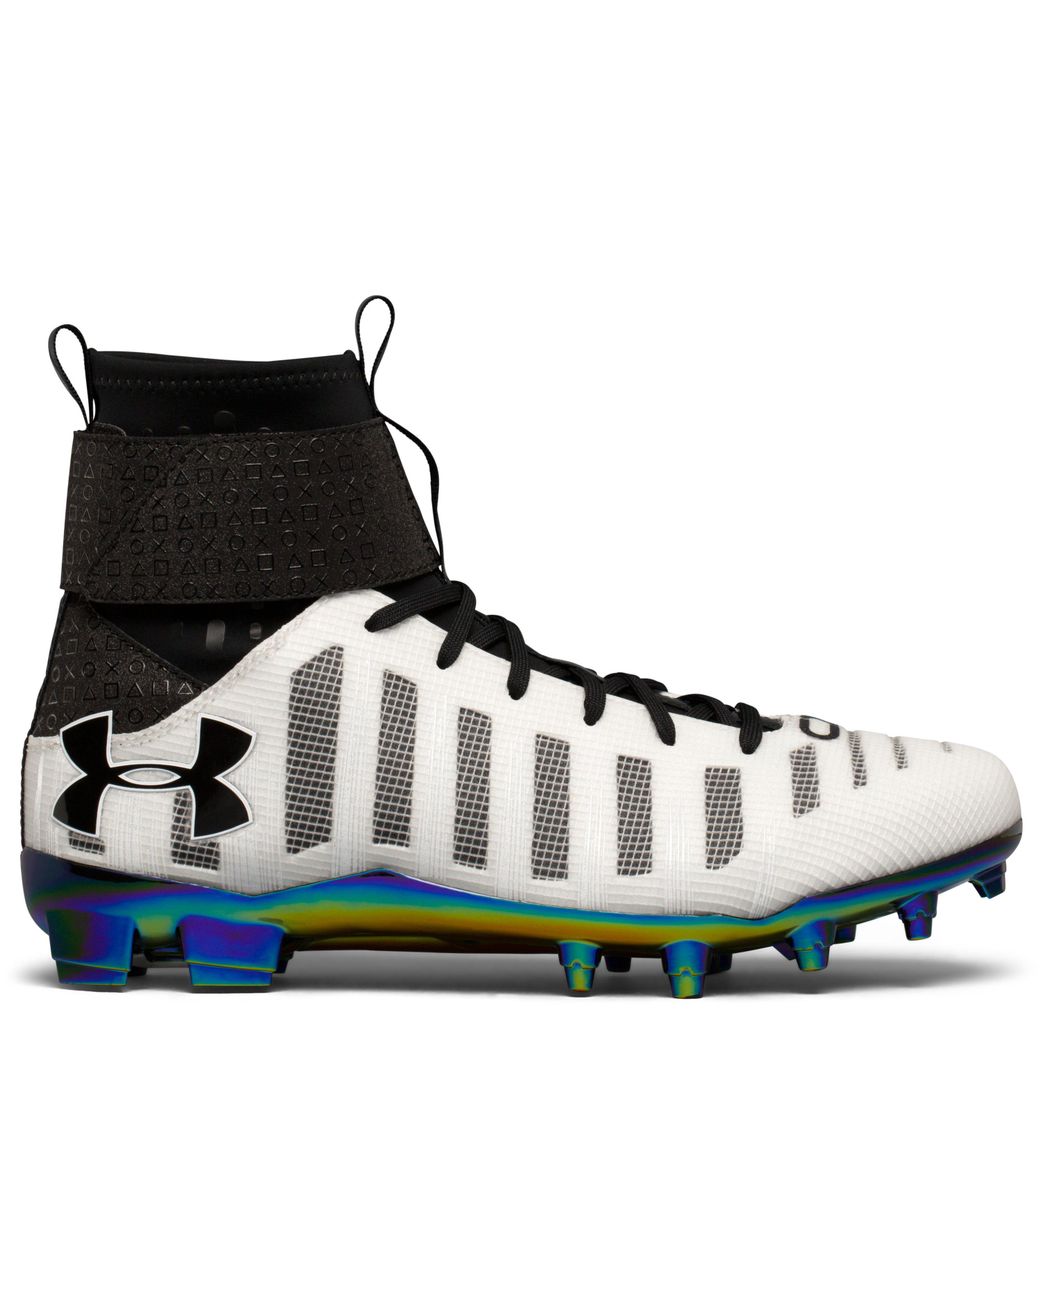 New Under Armour Men's C1N Mid Football Cleats Size Cam Newton 